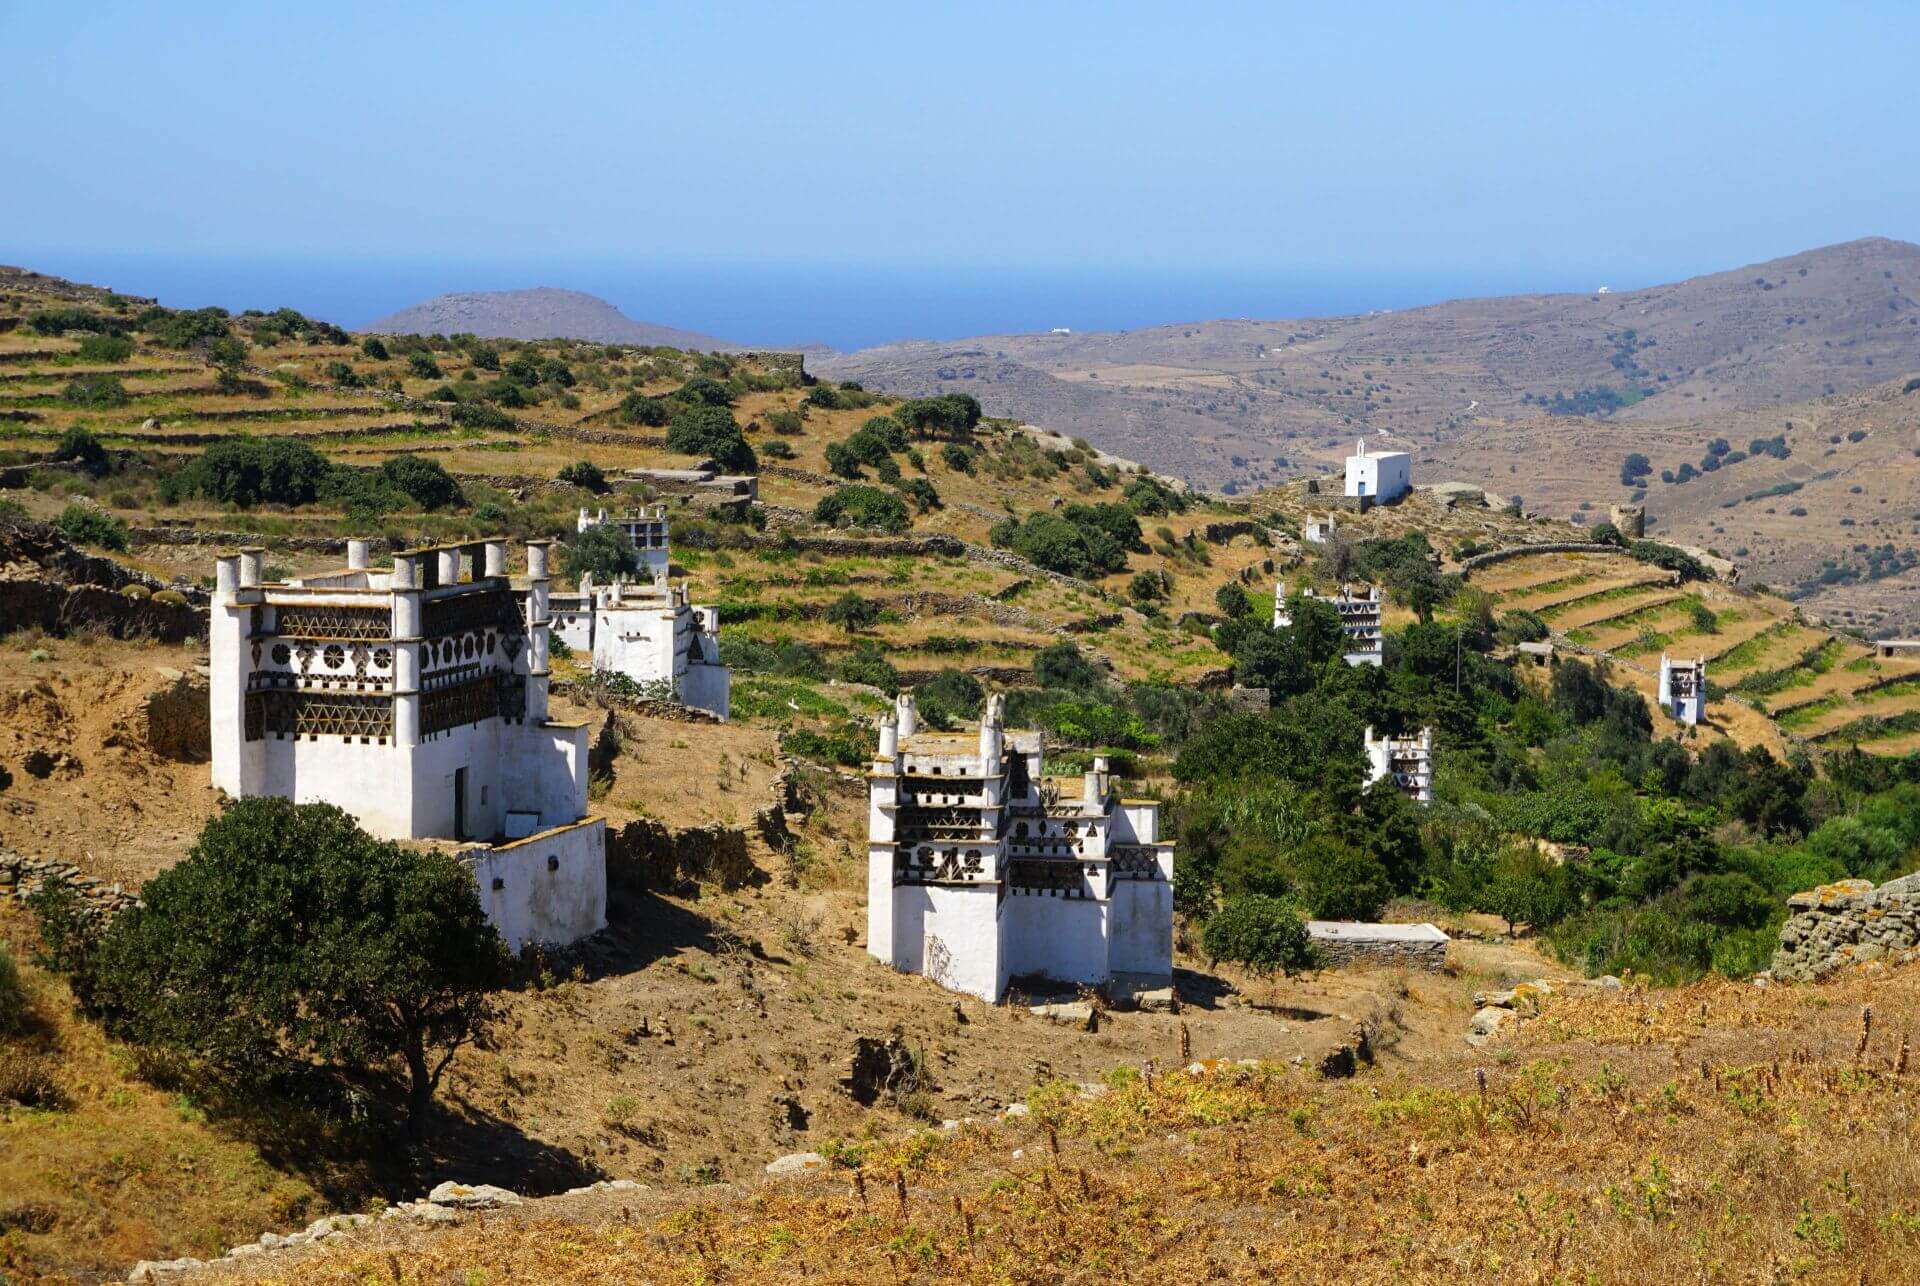 Tinos island: The valley of Dovecotes